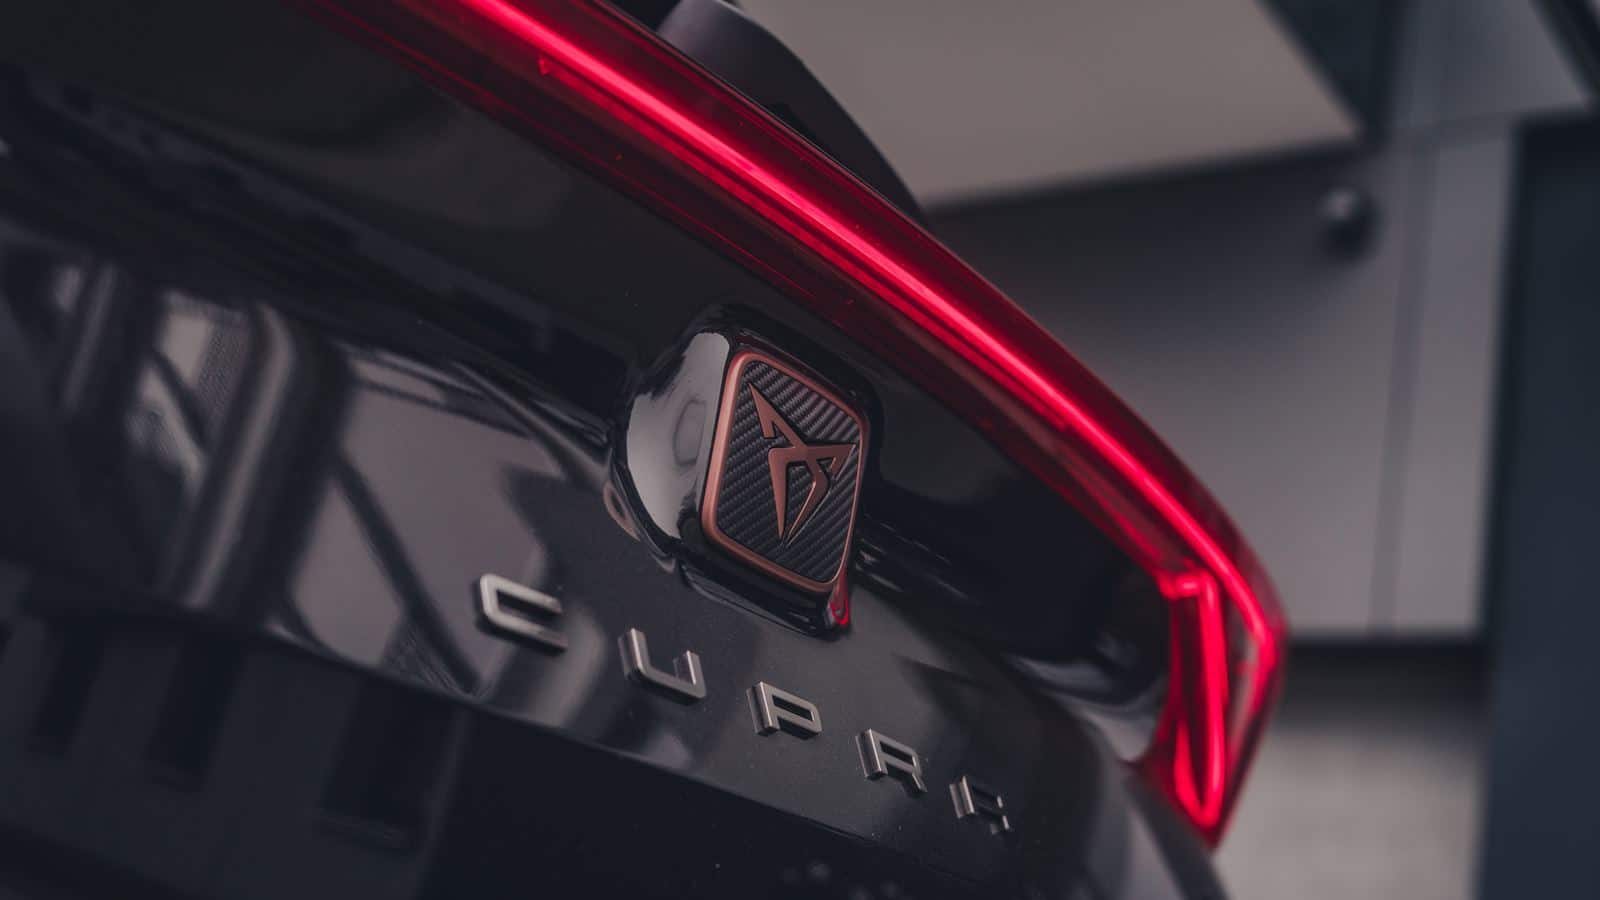 The CUPRA Formentor passes through ABT and achieves 450 hp